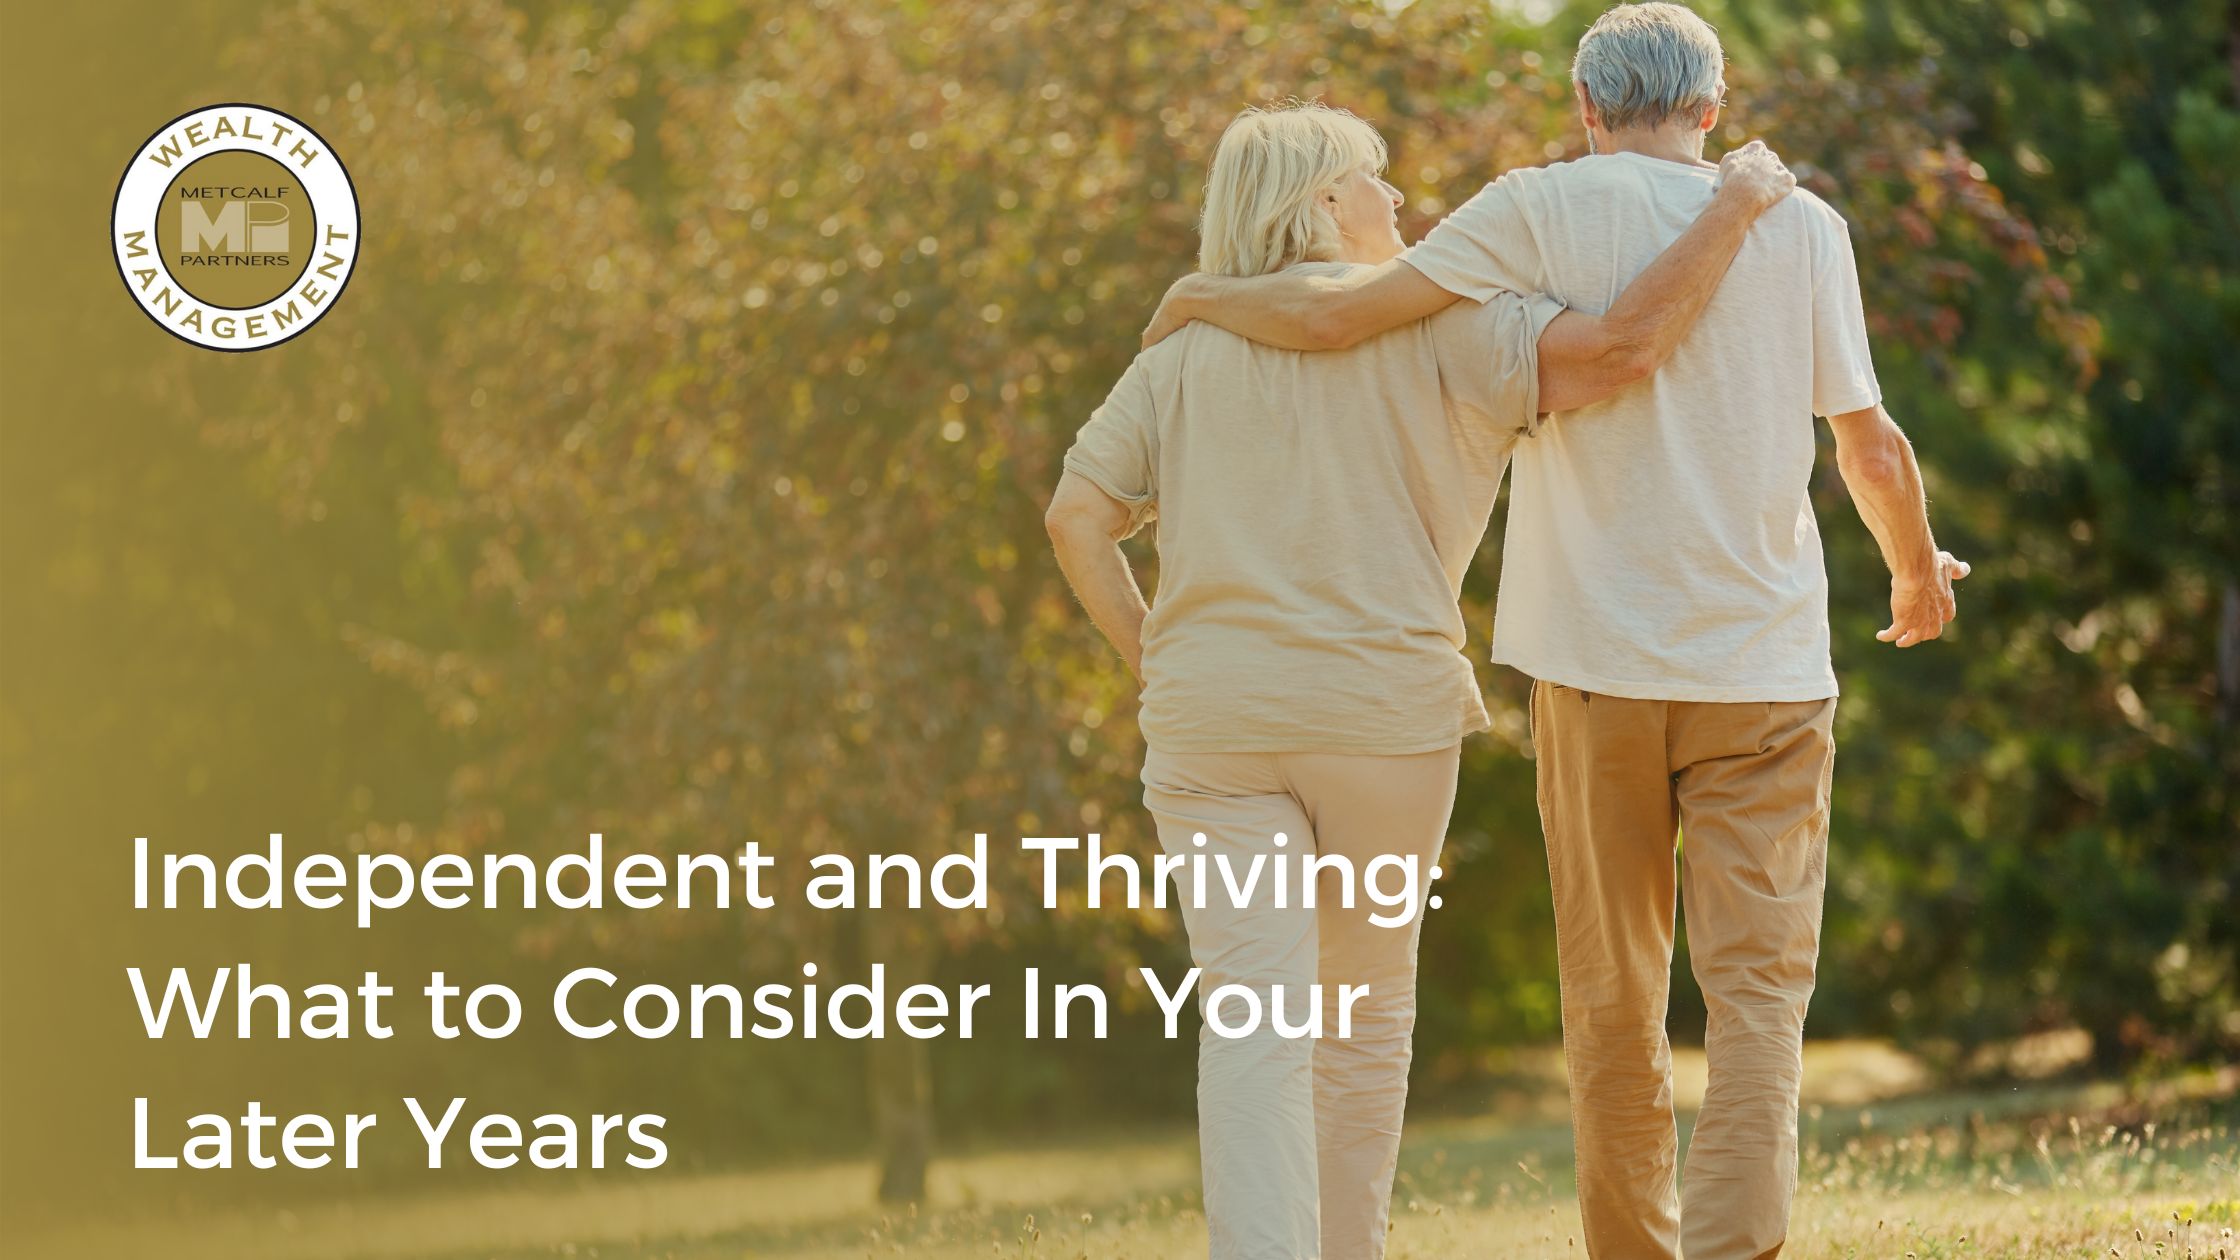 Featured image for “Independent and Thriving: What to Consider In Your Later Years”